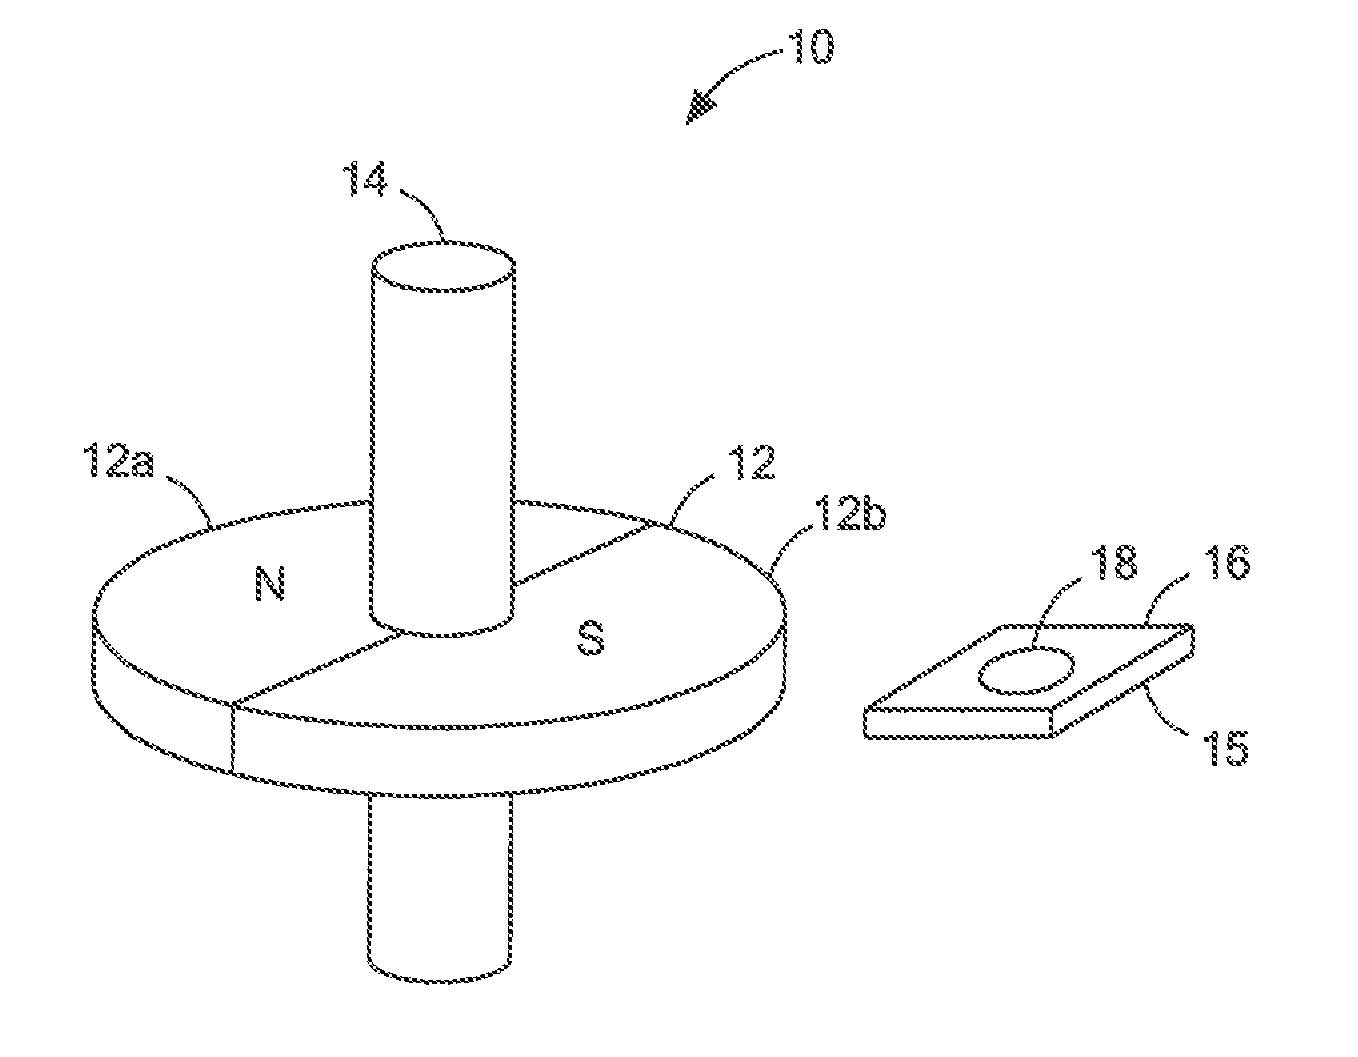 Circuits and Methods for Processing Signals Generated by a Circular Vertical Hall (CVH) Sensing Element in the Presence of a Multi-Pole Magnet